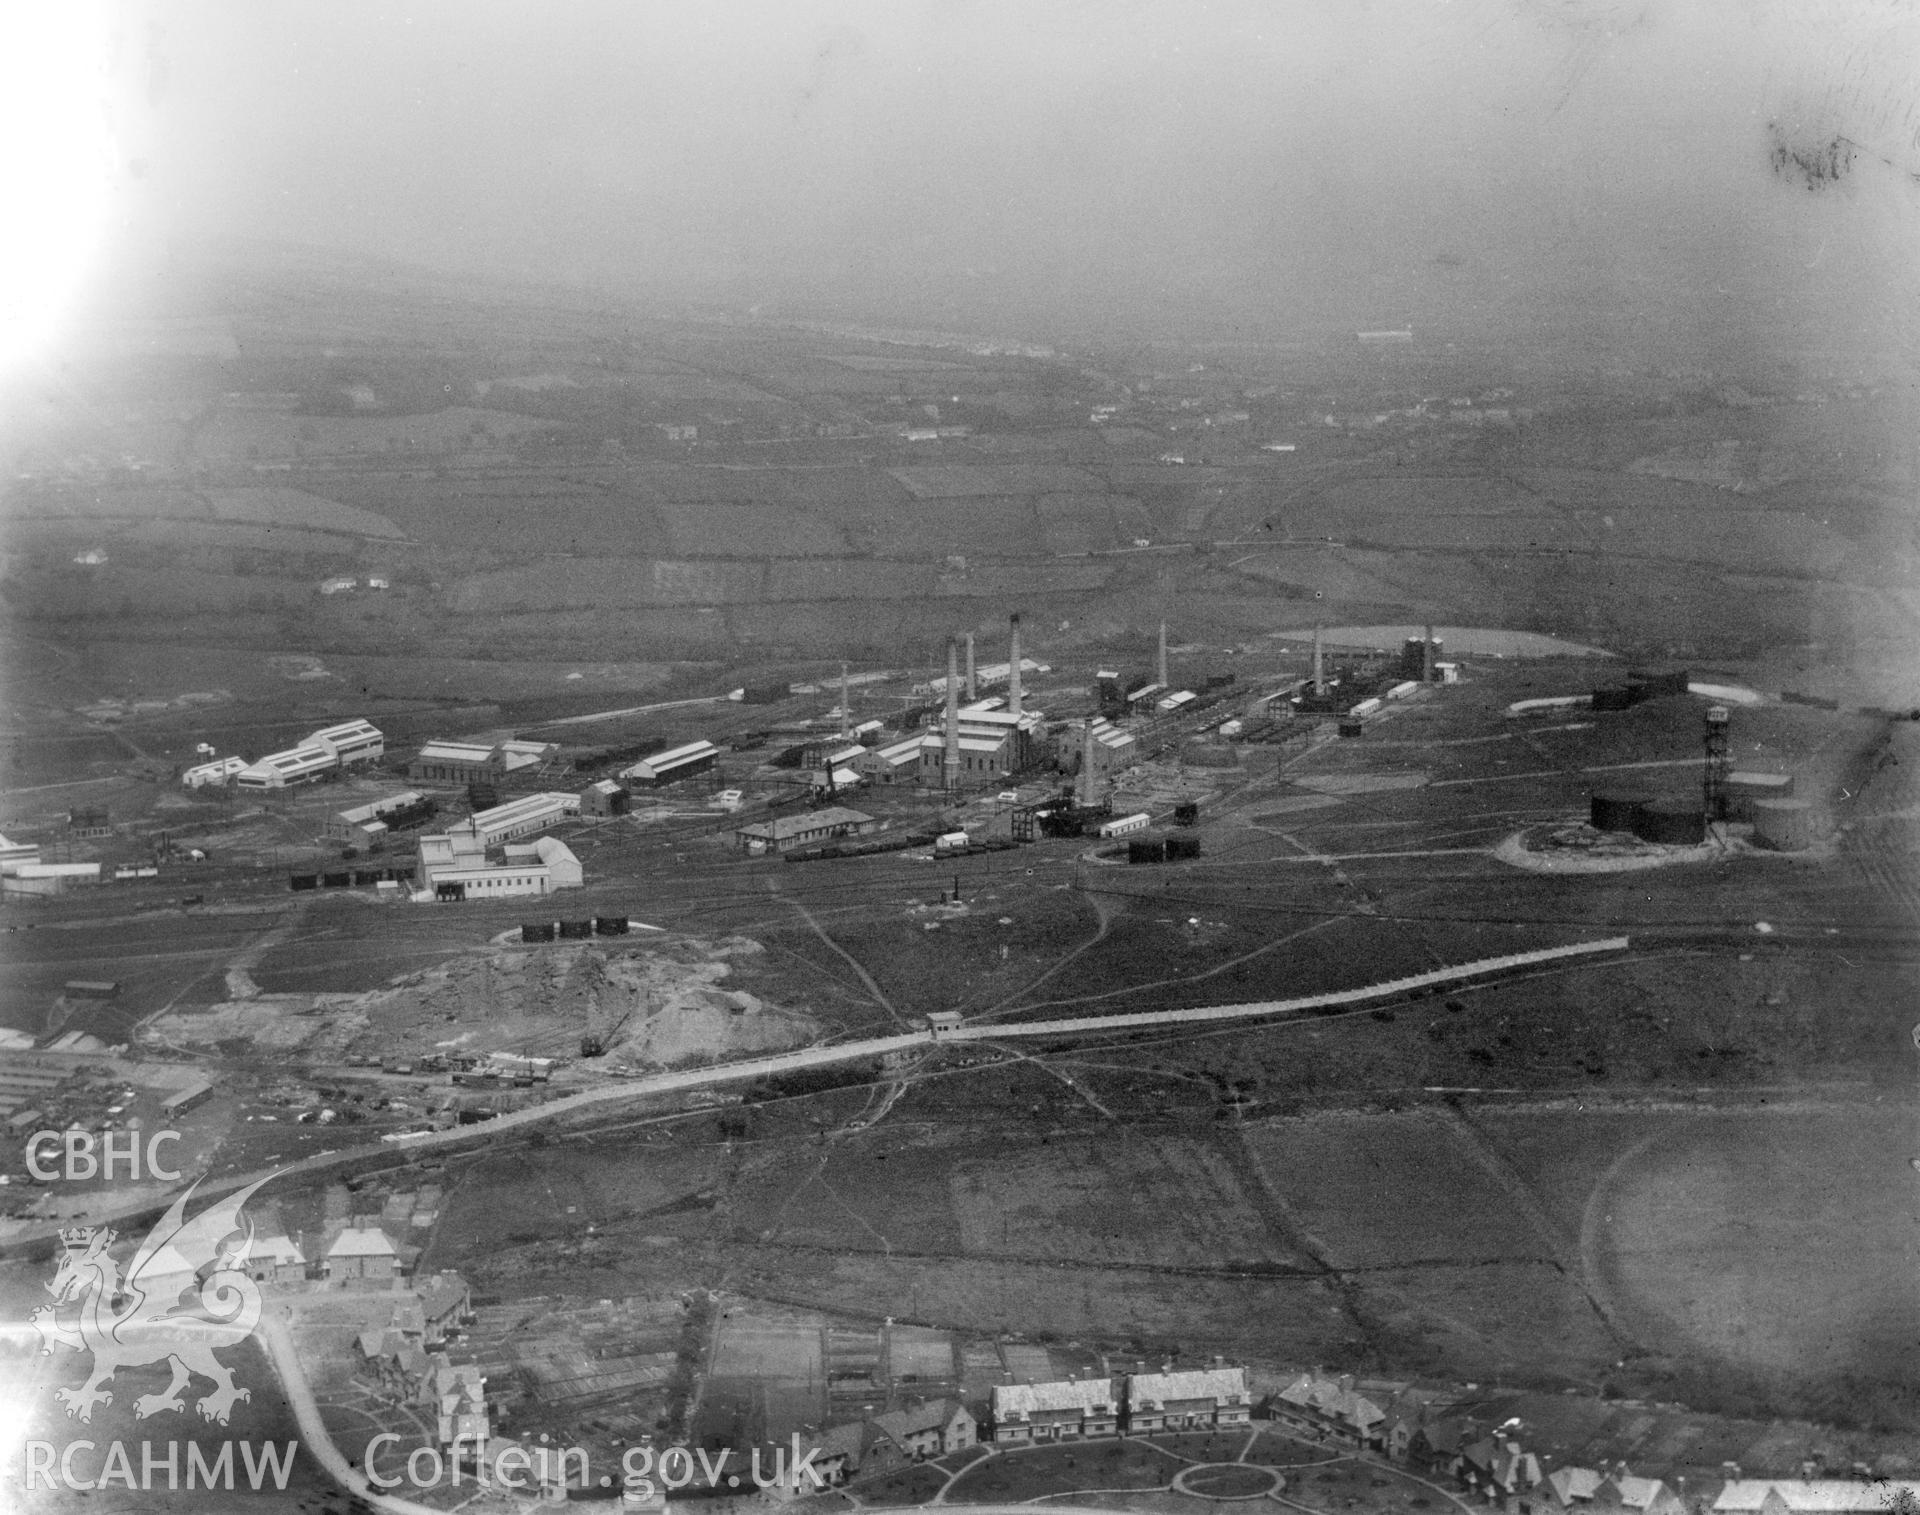 General view of the Anglo Iranian oil refinery, showing Llandarcy village in the foreground. Oblique aerial photograph, 5?x4? BW glass plate.